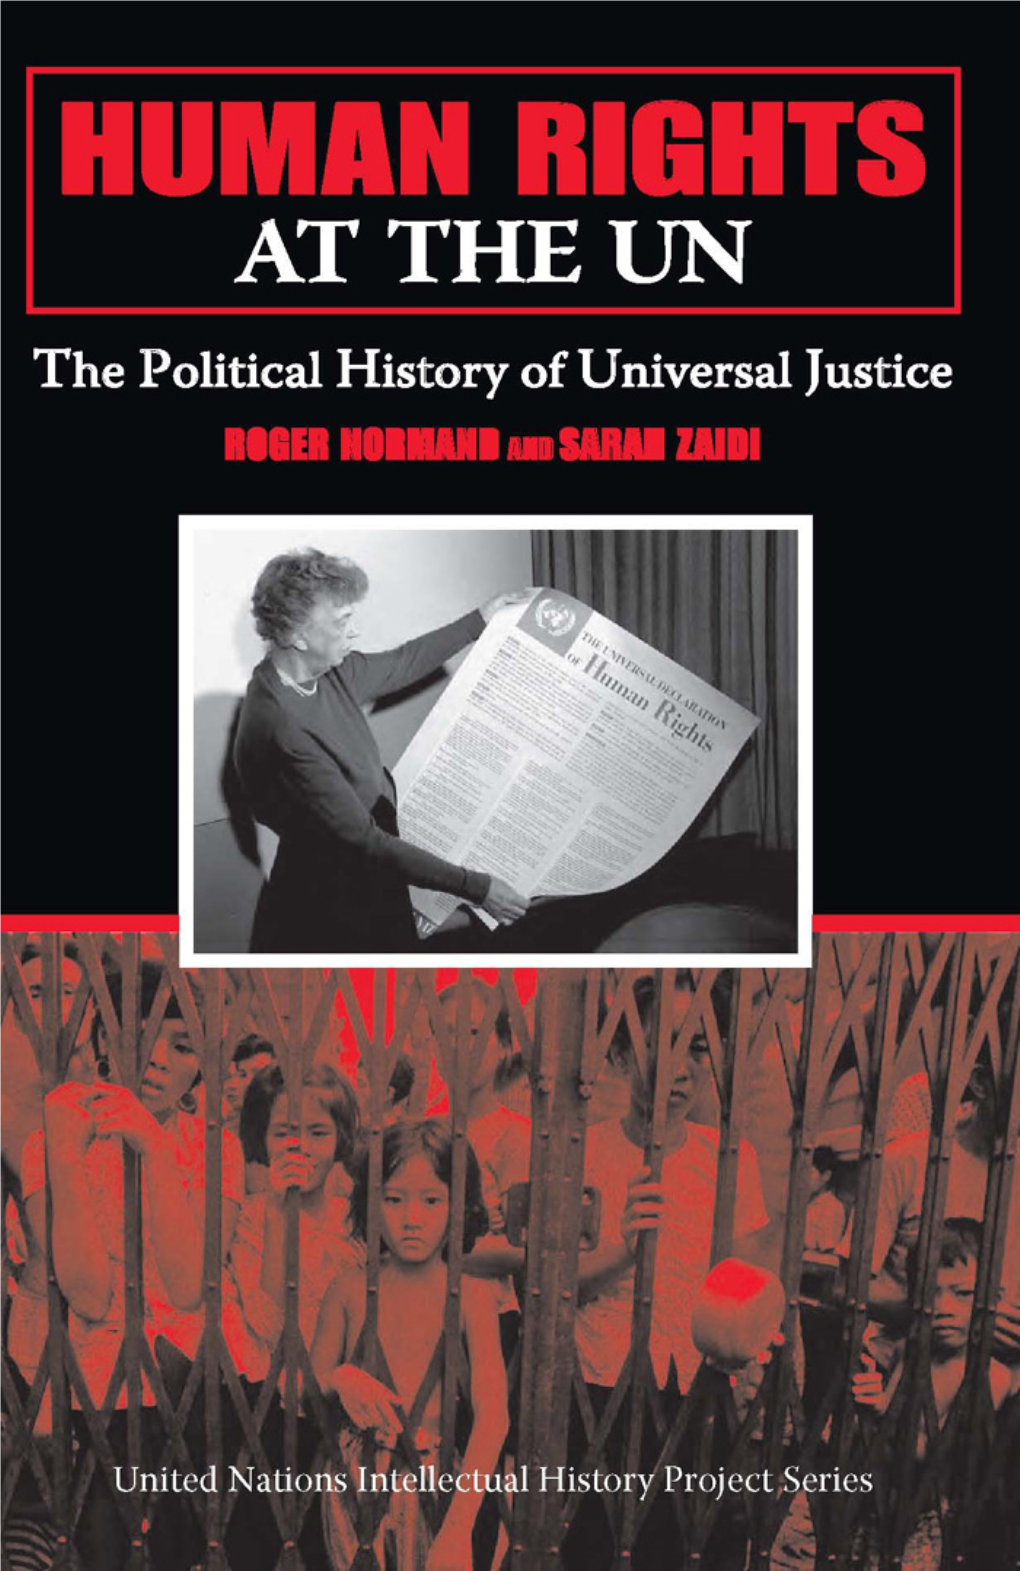 Human Rights at the UN: the Political History of Universal Justice Is the Ninth Volume in the Series—And in Some Respects the Most Challenging and Outspoken